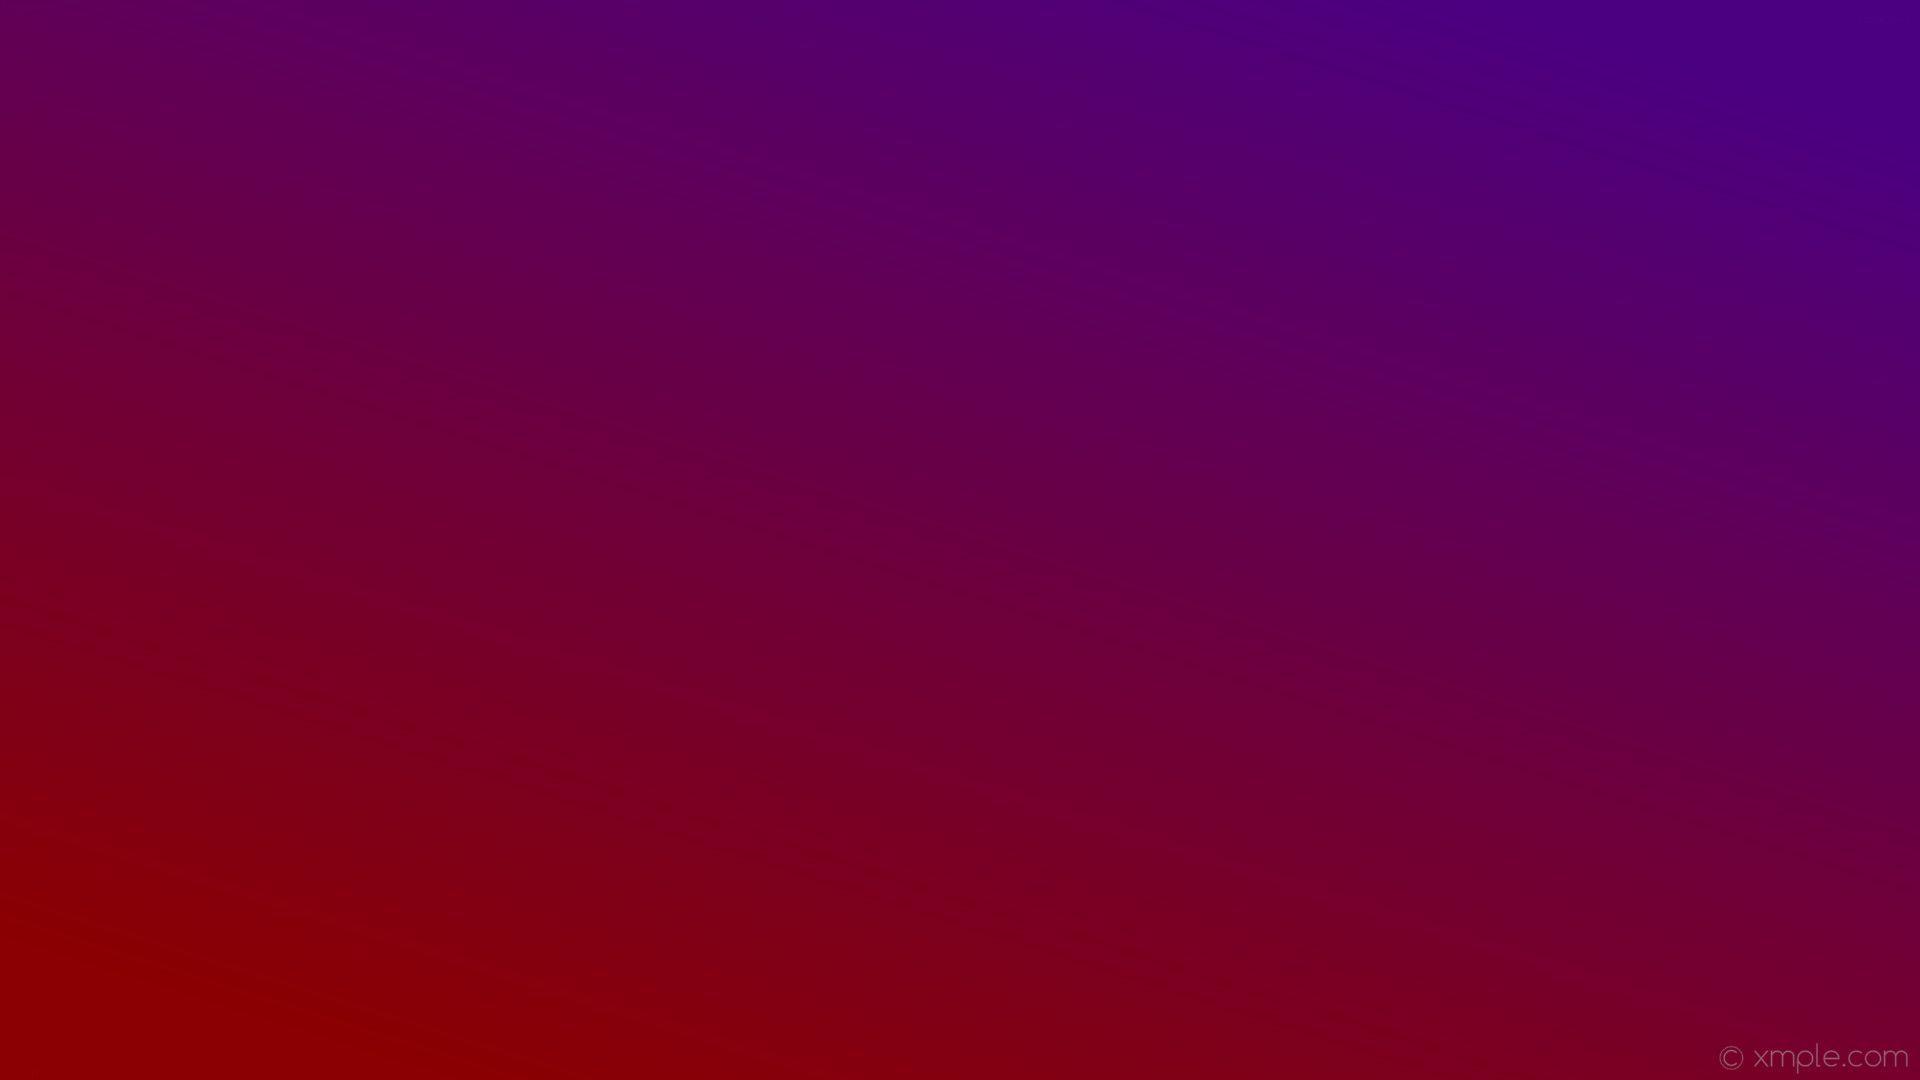 HD wallpaper purple and red computer graphic art abstraction 3d  background  Wallpaper Flare